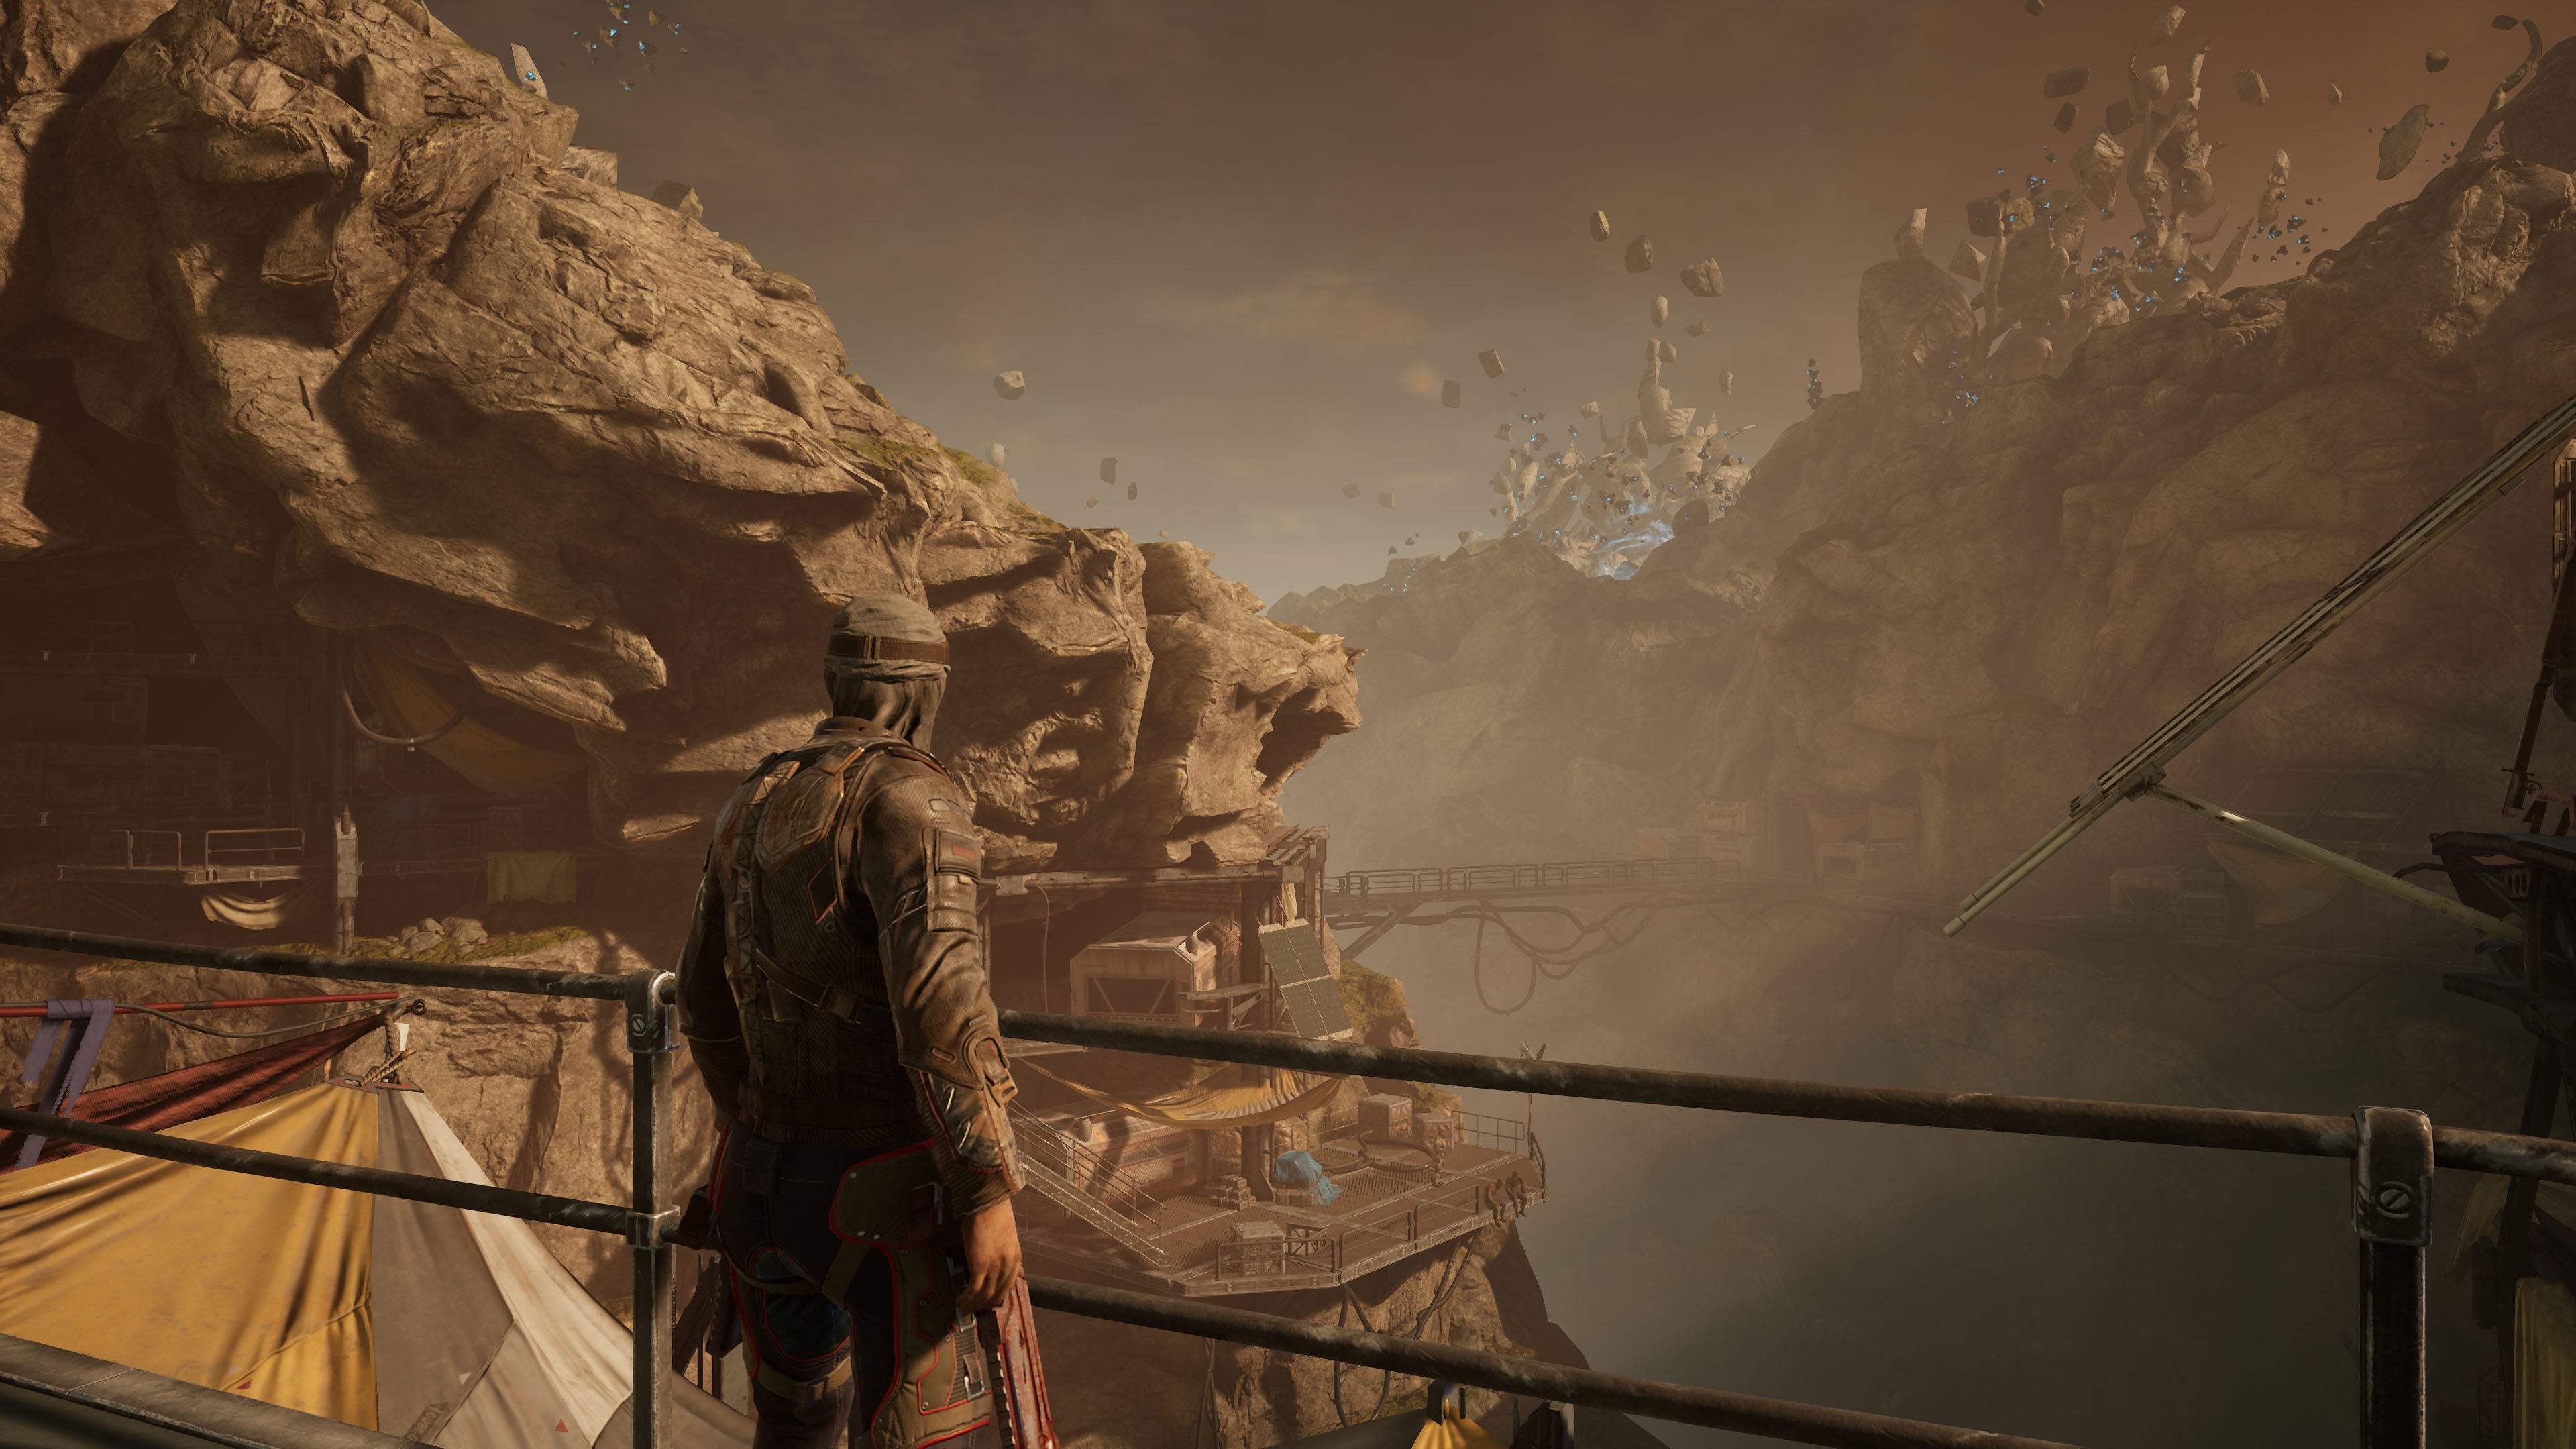 A player character looking out over a rocky valley in Outriders, running at 4K Ultra settings (native)